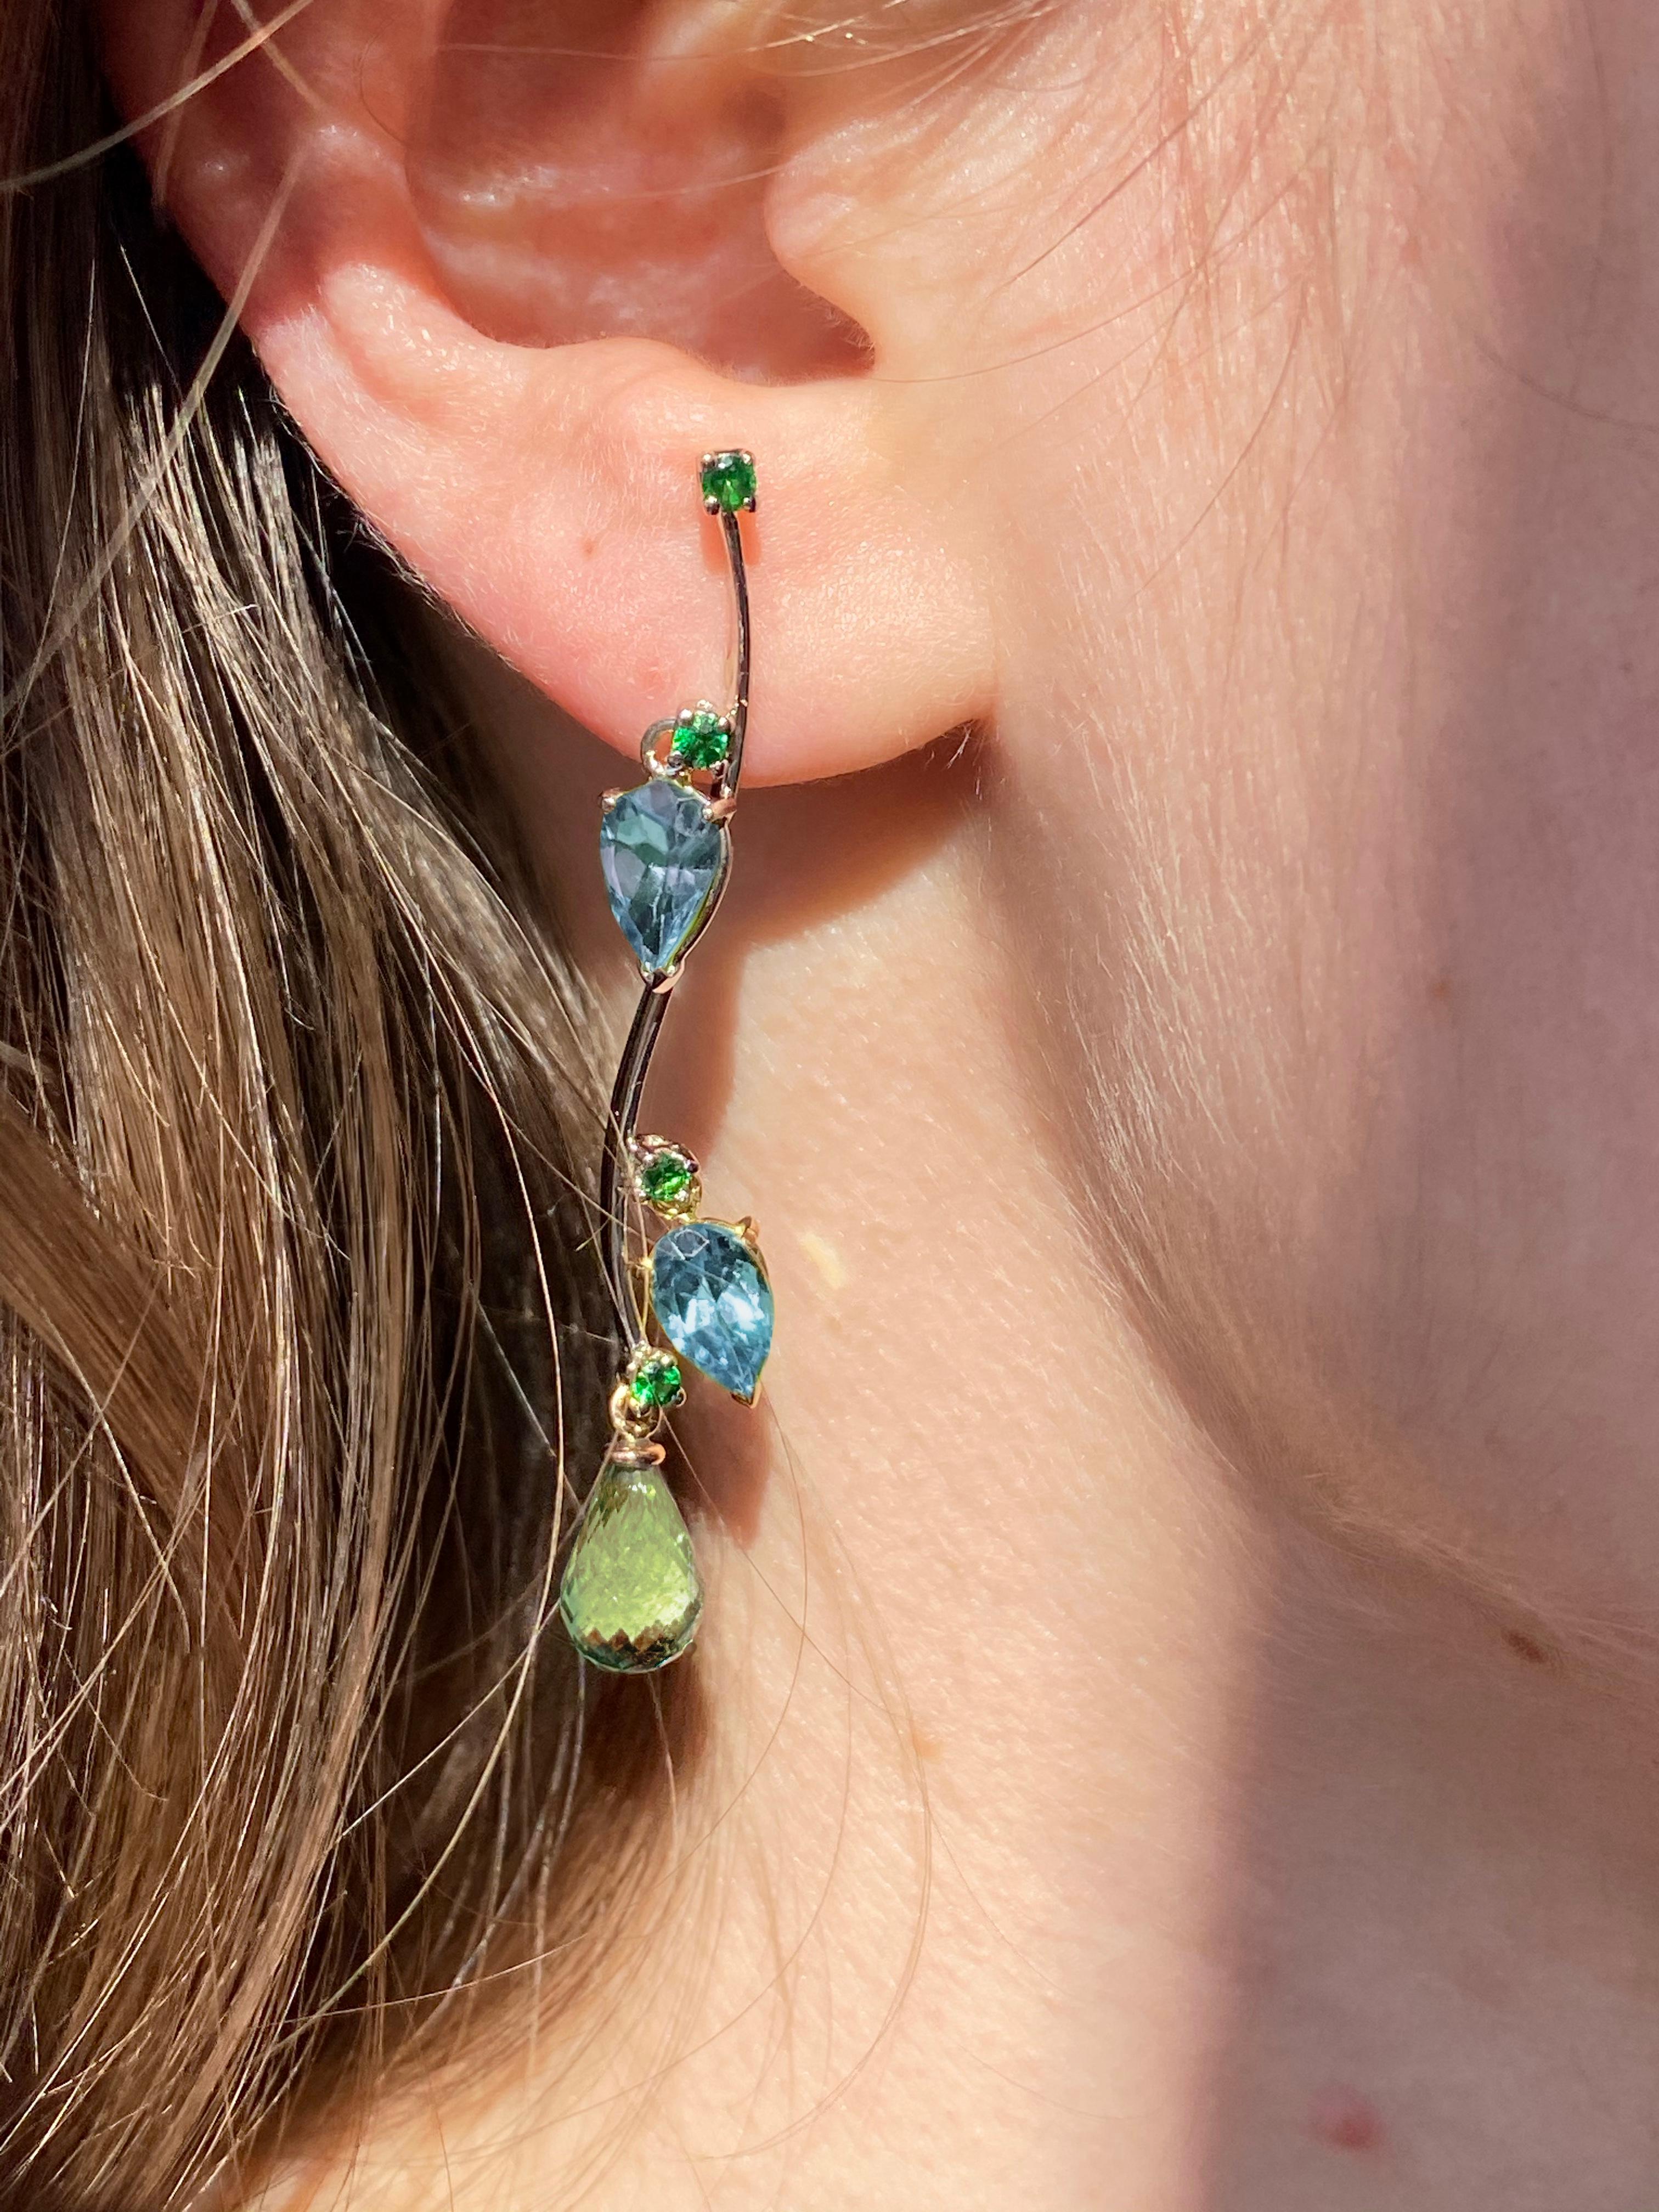 Rossella Ugolini Design Collection a Modern Style dangle Earrings Handcrafted in 18 Karats Gold with shade of blue and green colors :  Topaze bleue taille poire,  Des tsavorites taillées en rond, des tourmalines briolettes vert clair.  Les branches